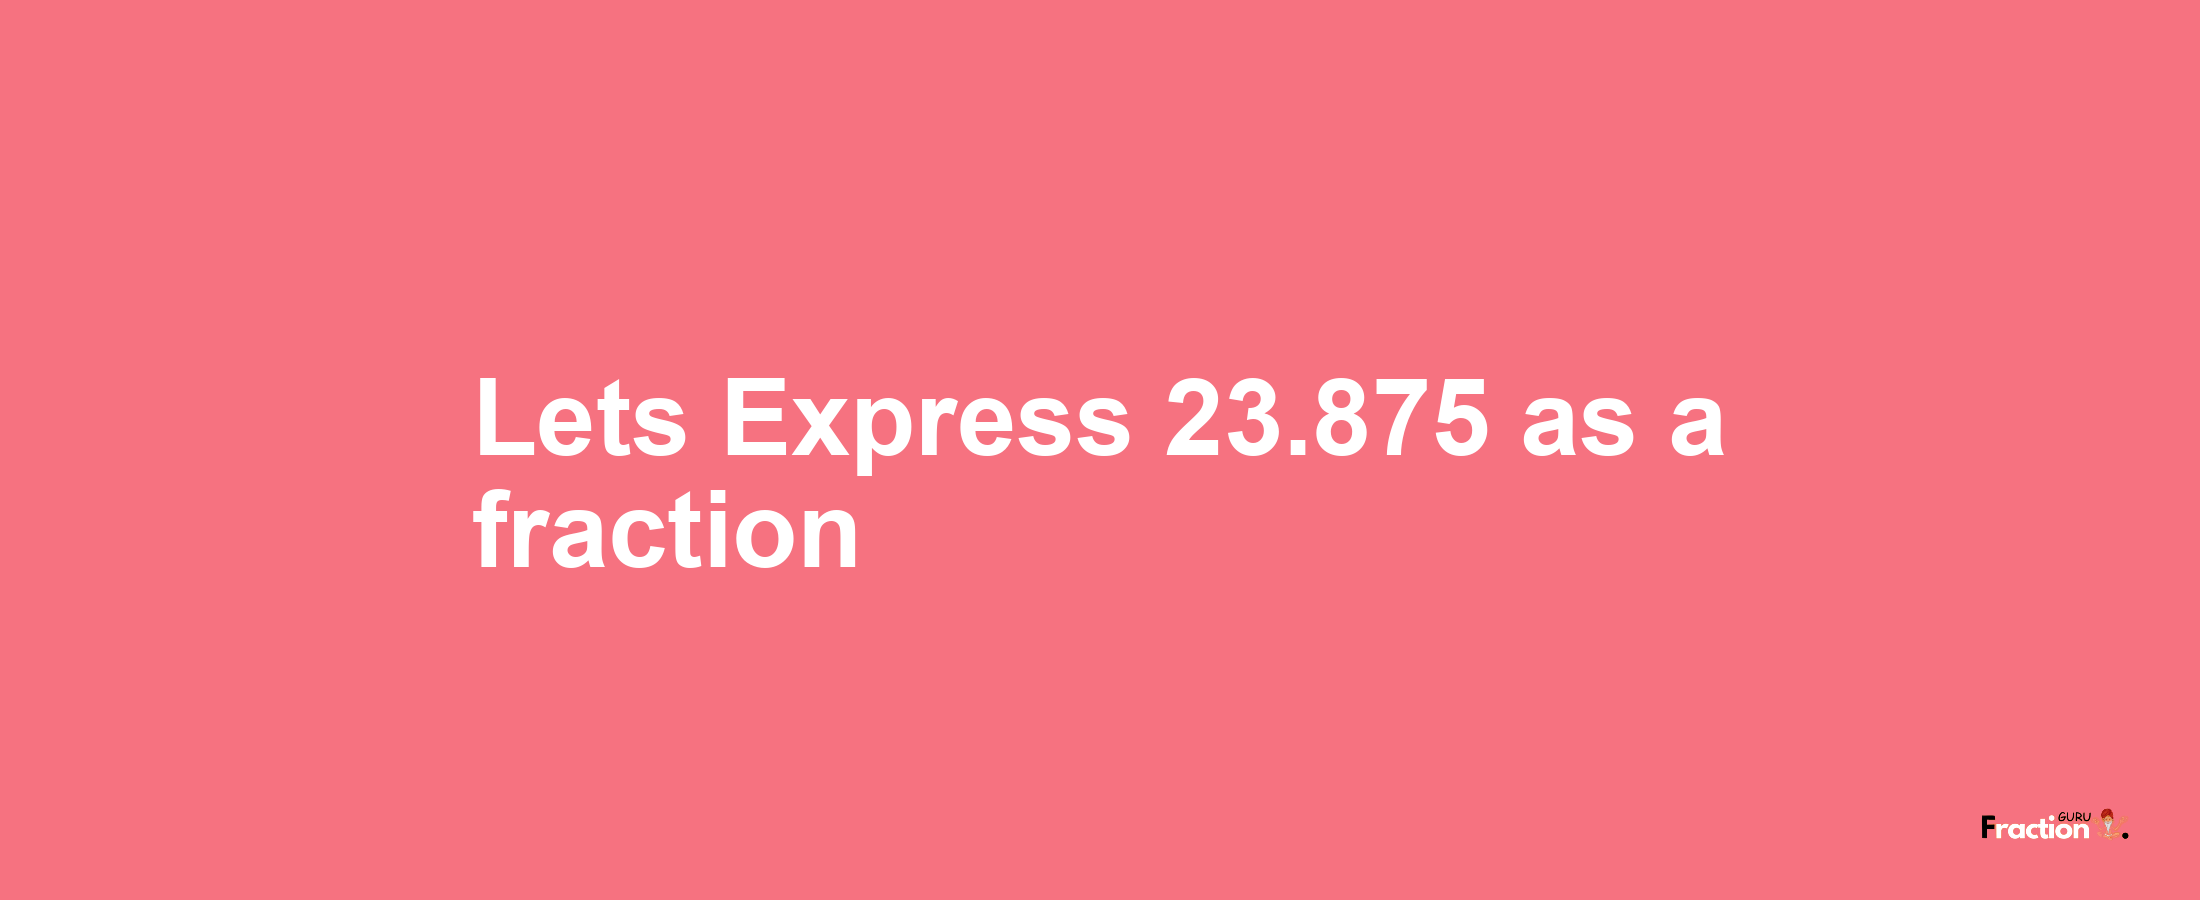 Lets Express 23.875 as afraction